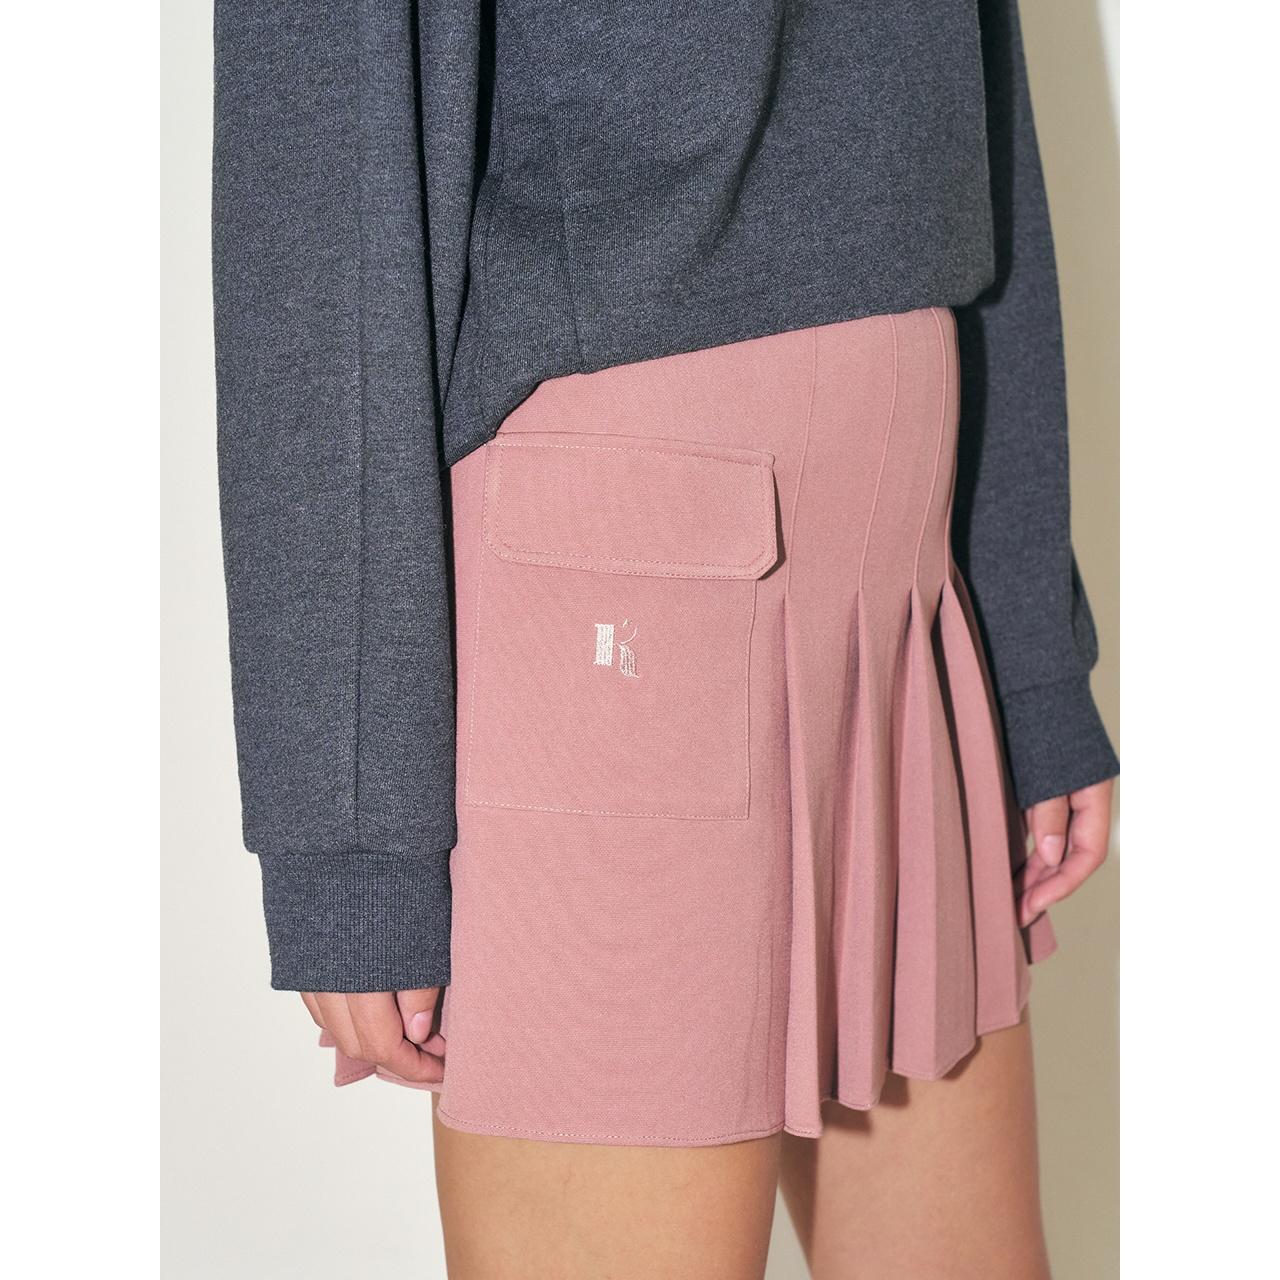 PATCH POCKET PLEATED SKIRT, PINK